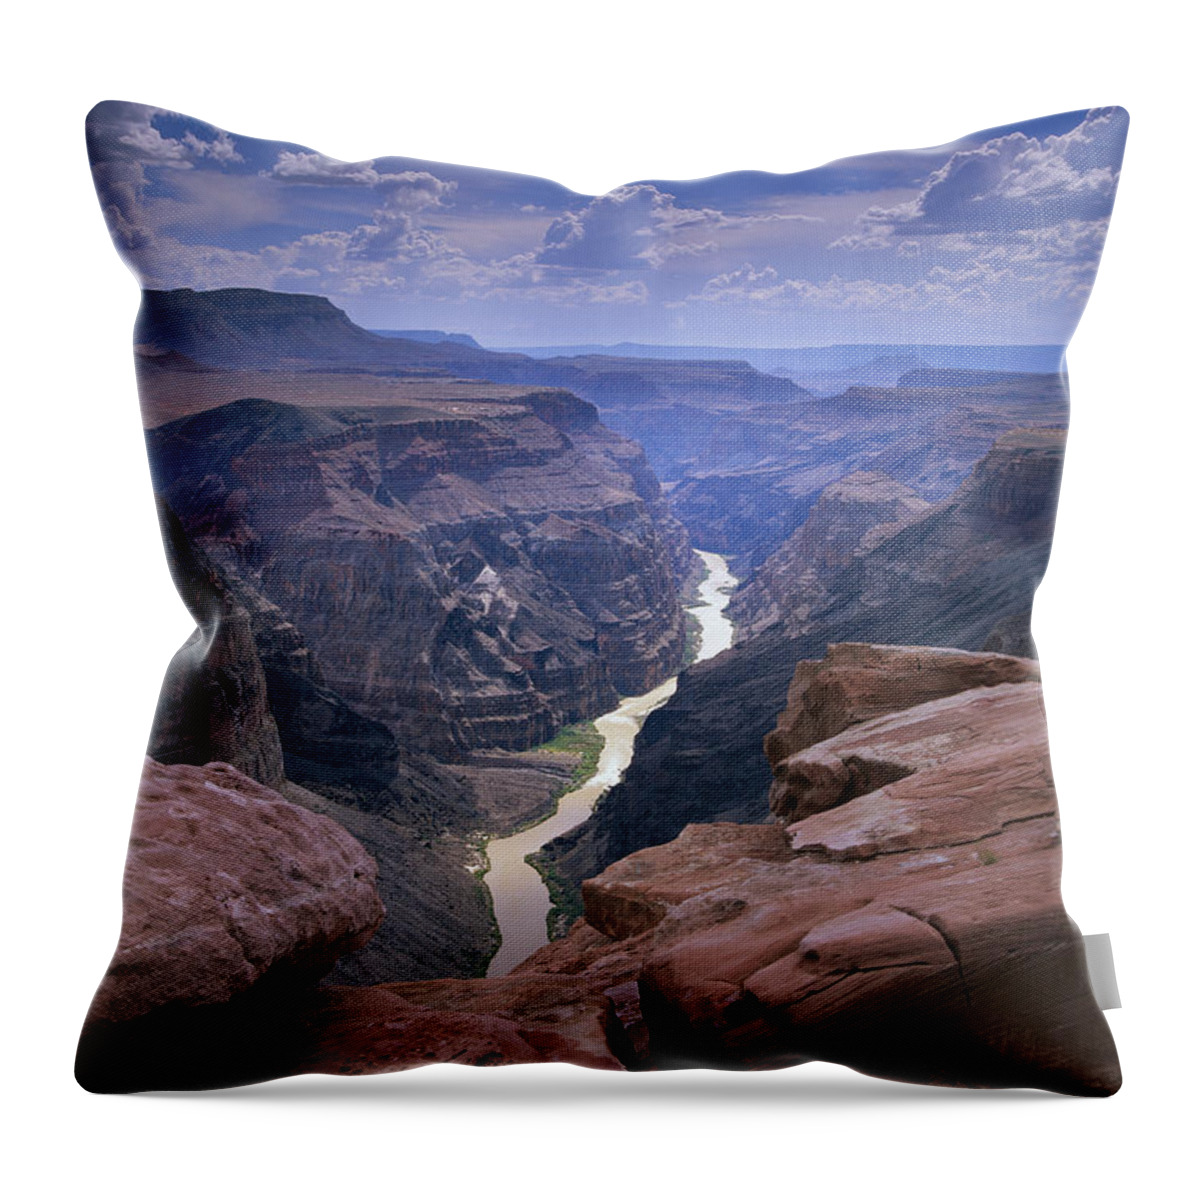 00174880 Throw Pillow featuring the photograph Colorado River Grand Canyon National by Tim Fitzharris